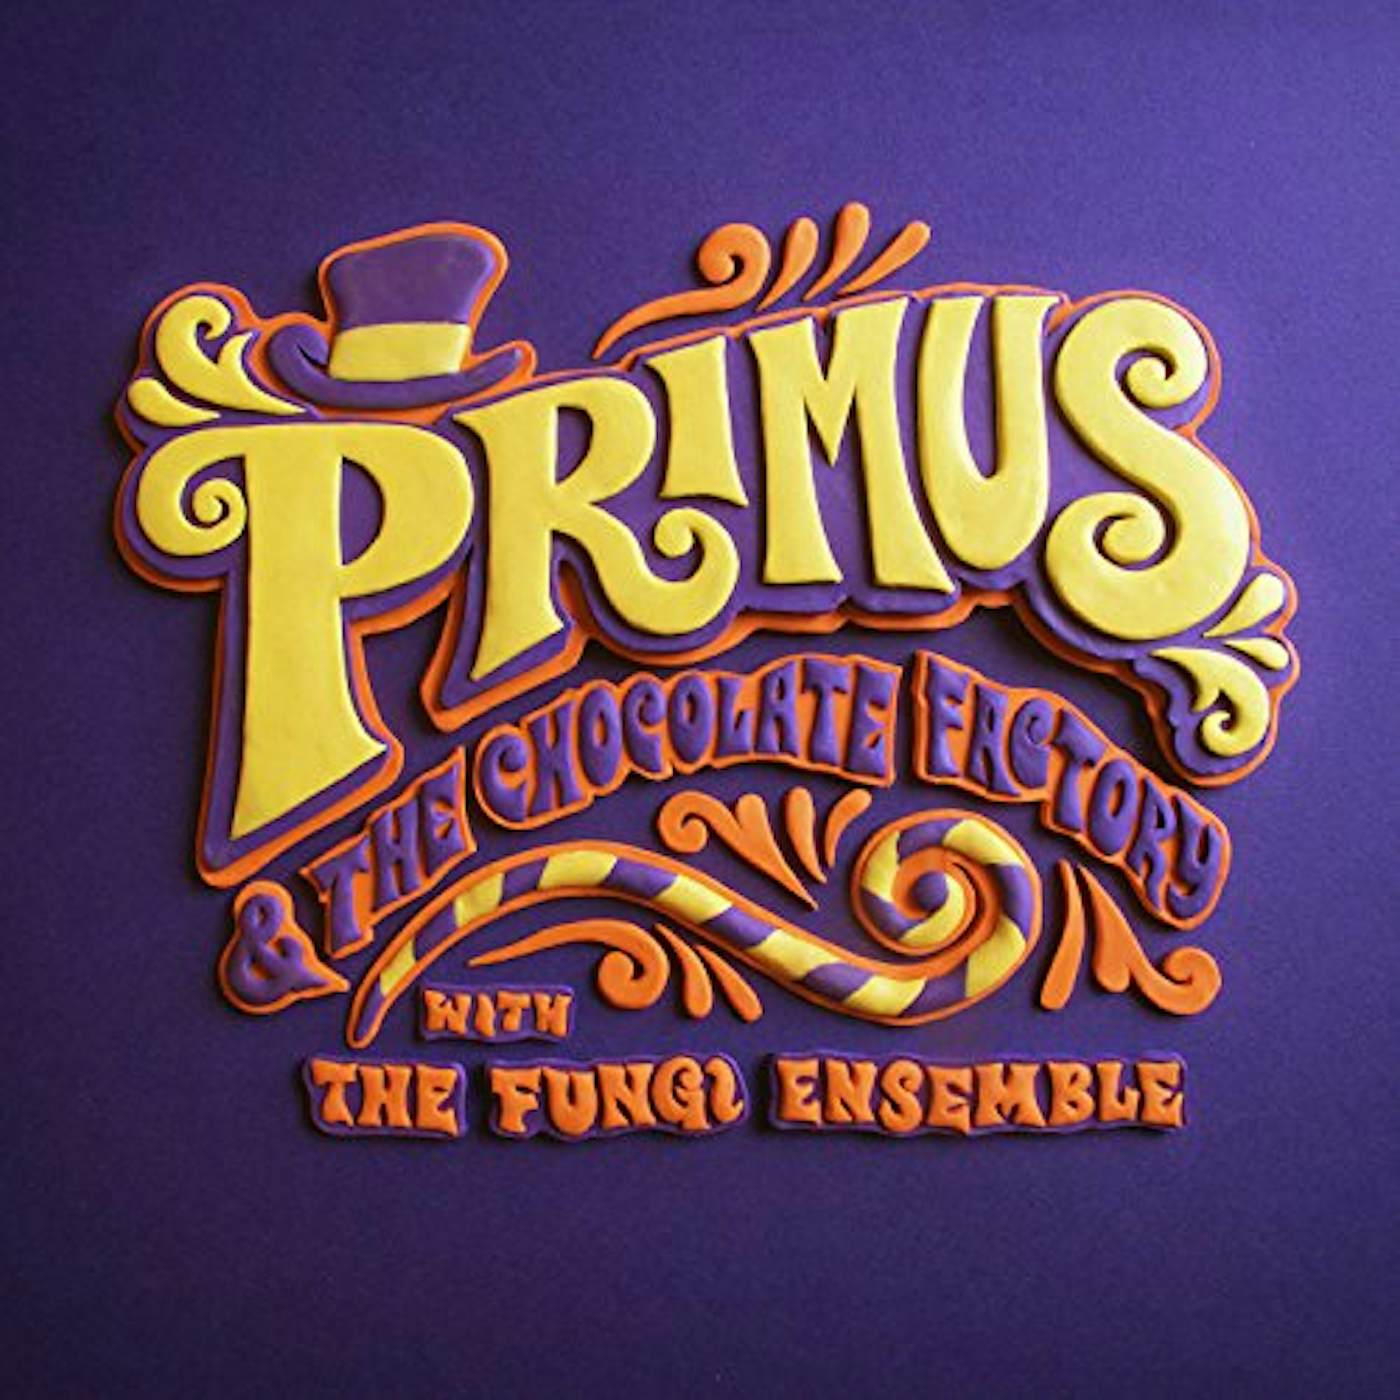 PRIMUS & THE CHOCOLATE FACTORY WITH THE FUNGI ENSE CD